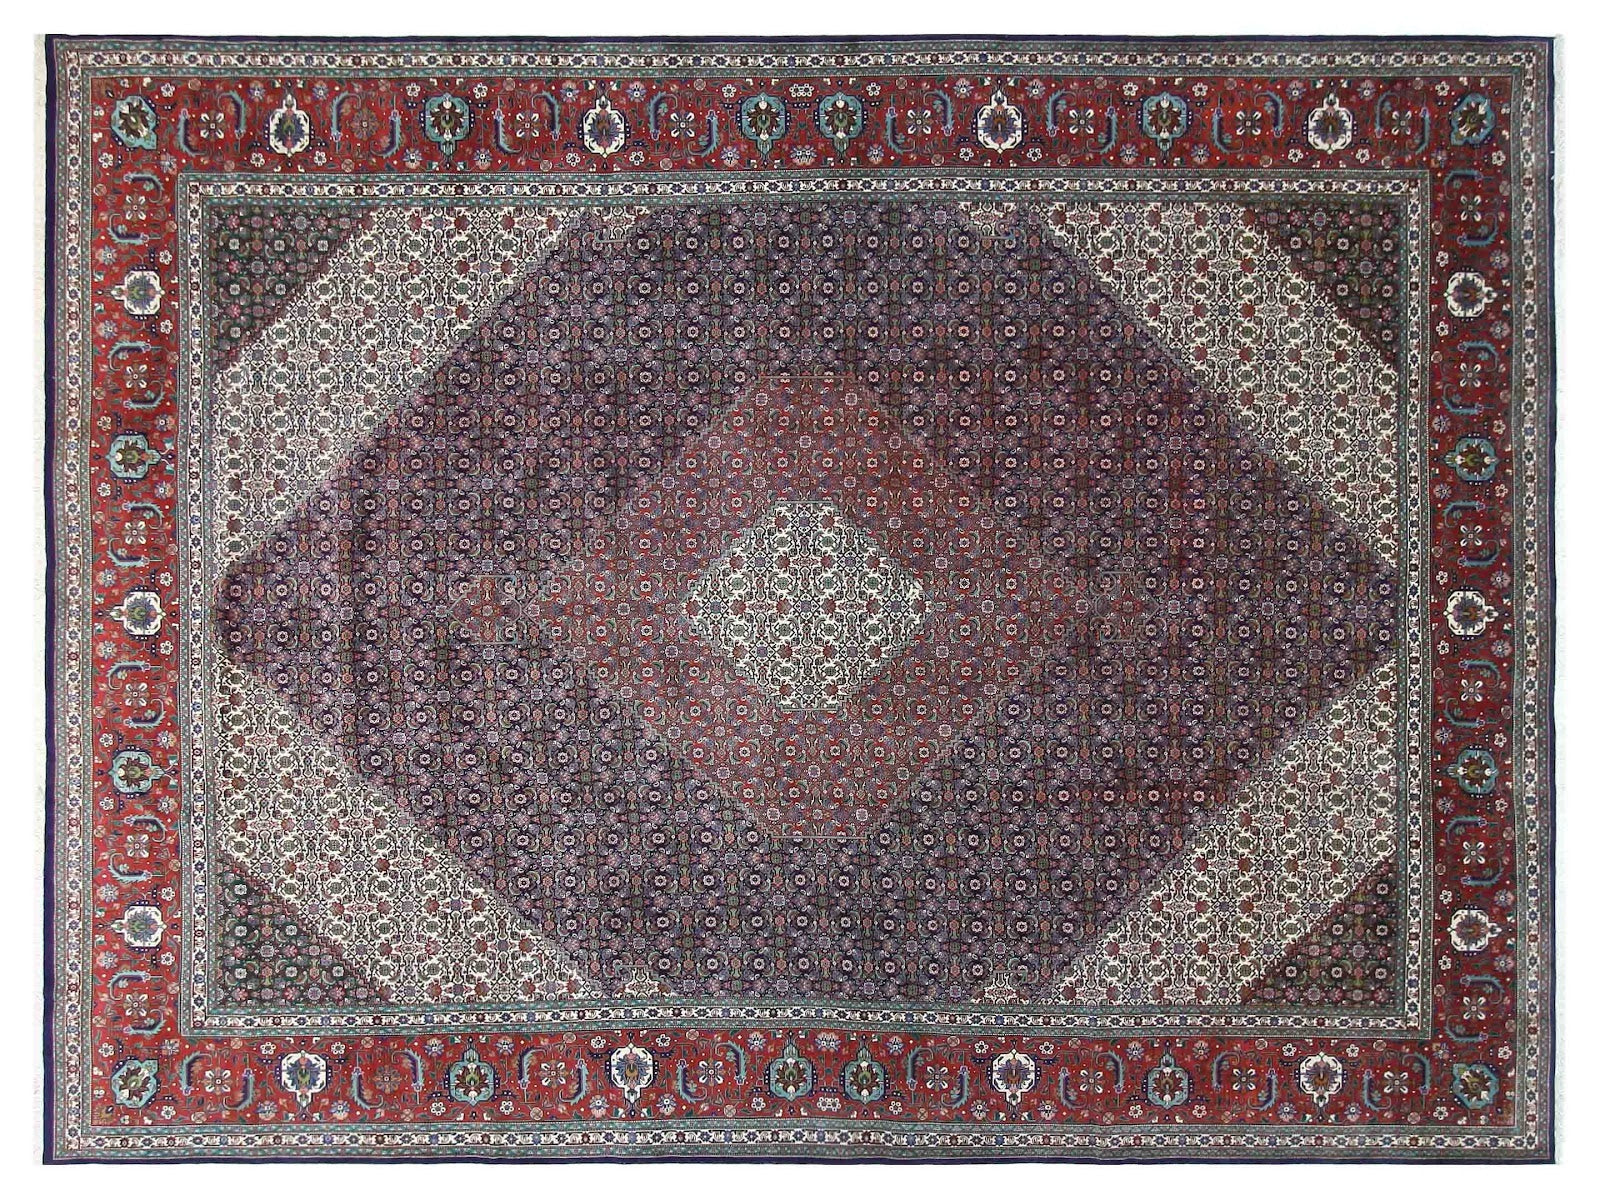 11x16 hand-knotted vintage Tabriz rug with navy blues, reds, and an ivory border, from the Vintage Tabriz Elite Collection